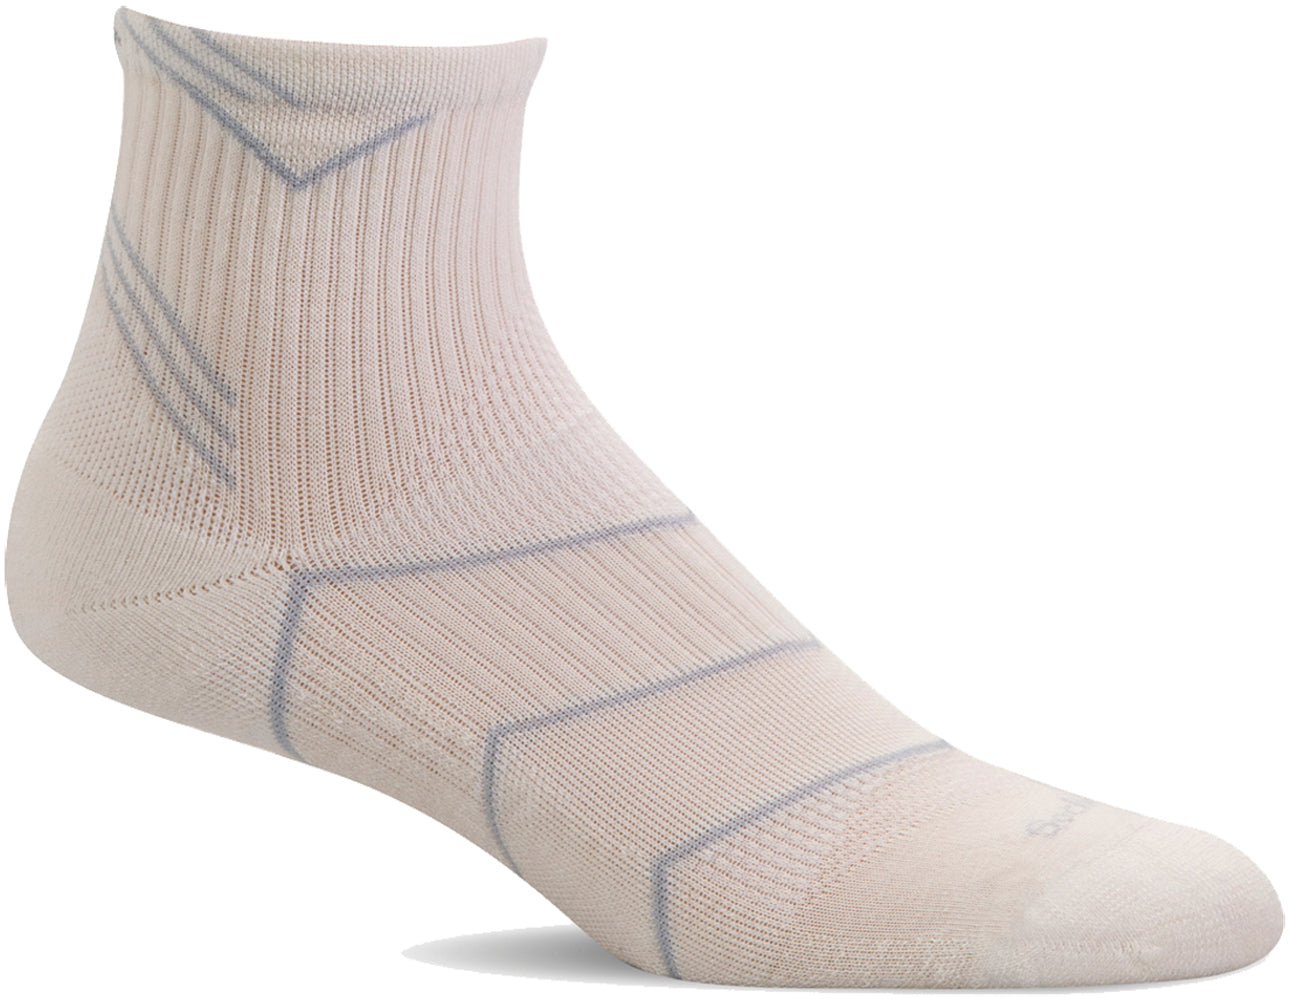 Sockwell Women's Incline Quarter Sock in Natural/Black color from the side